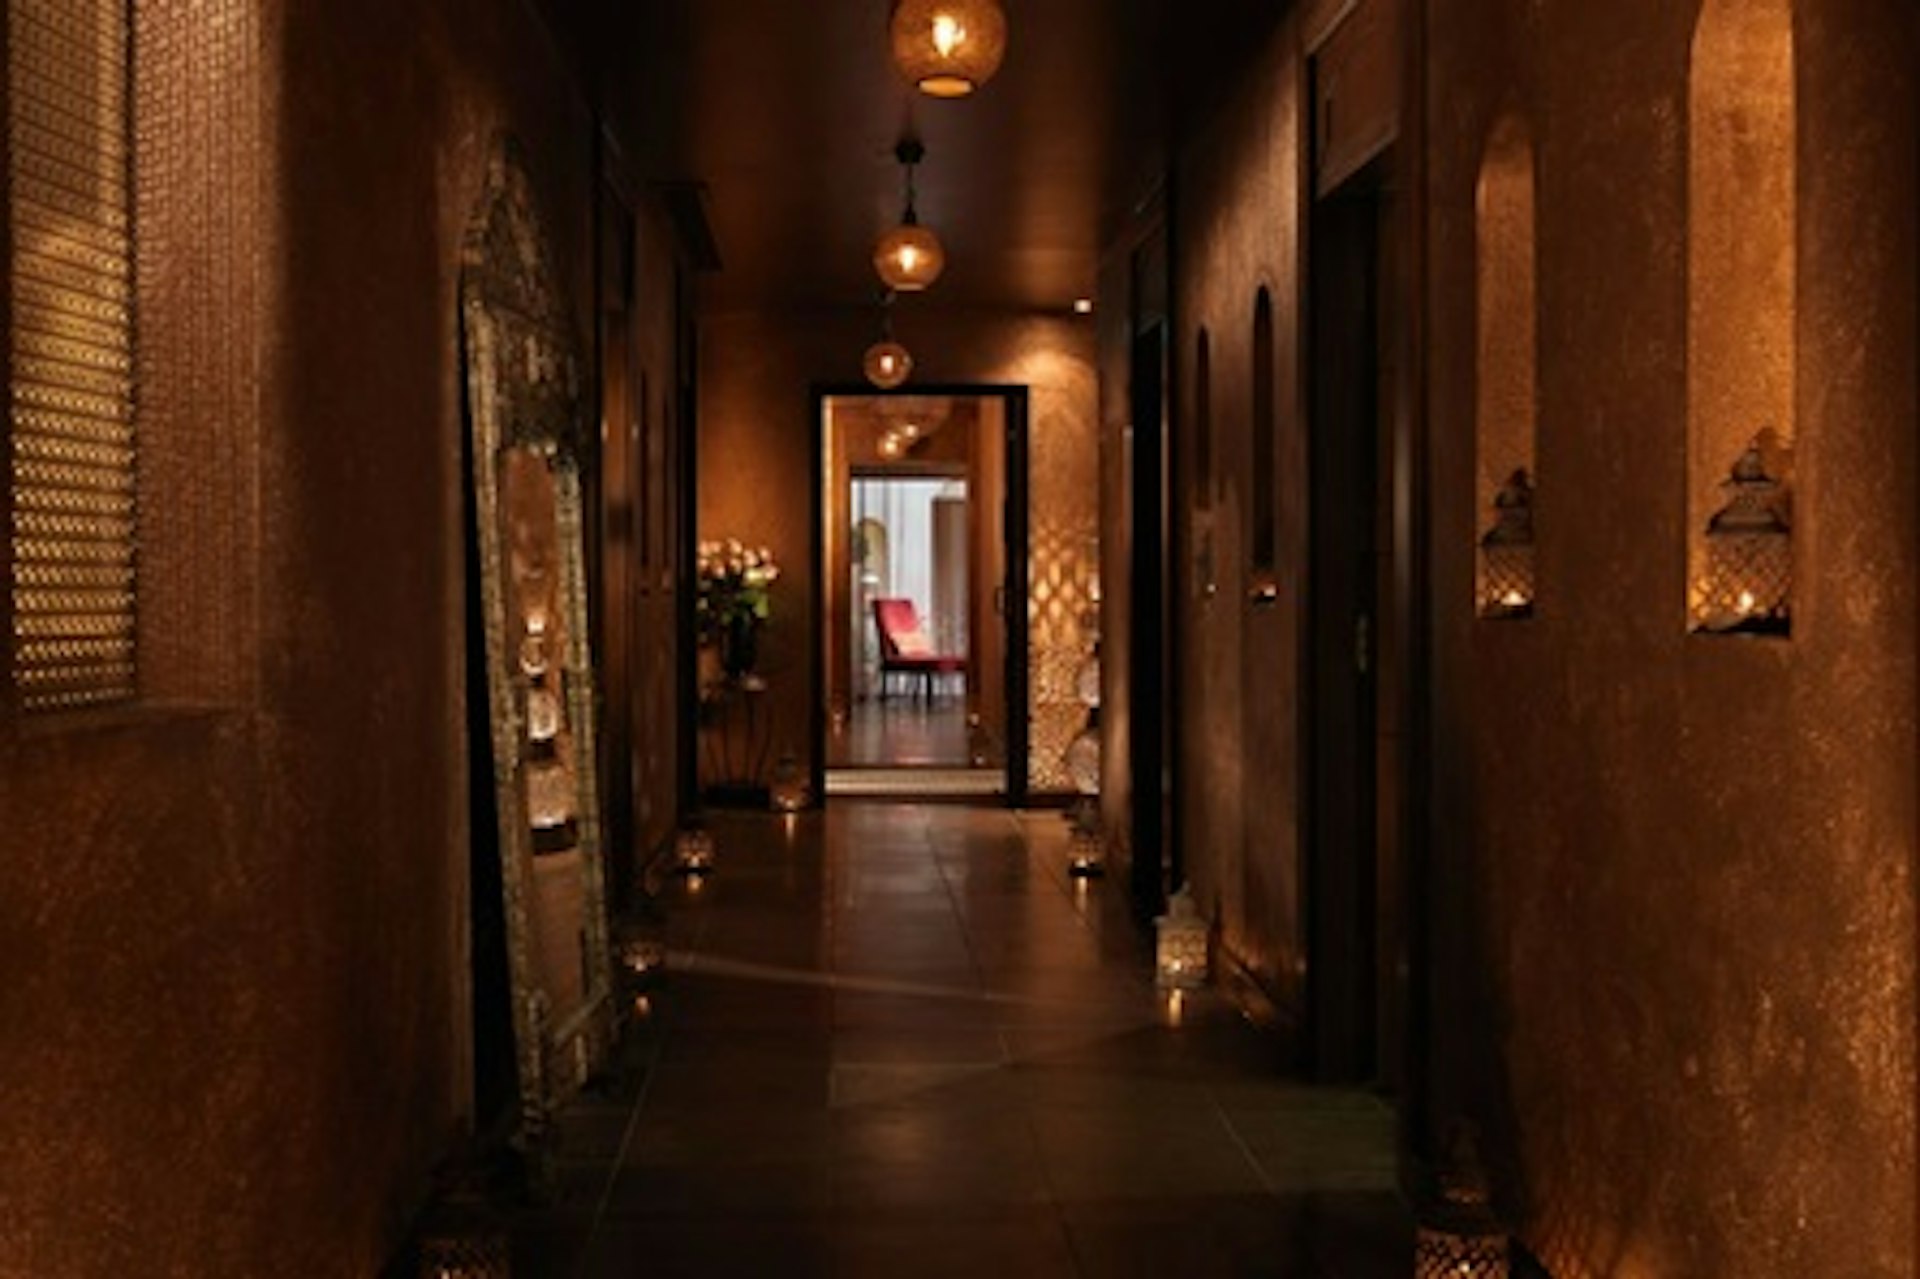 Detox Spa: Hammam Experience and Massage for Two at The Spa in Dolphin Square 2